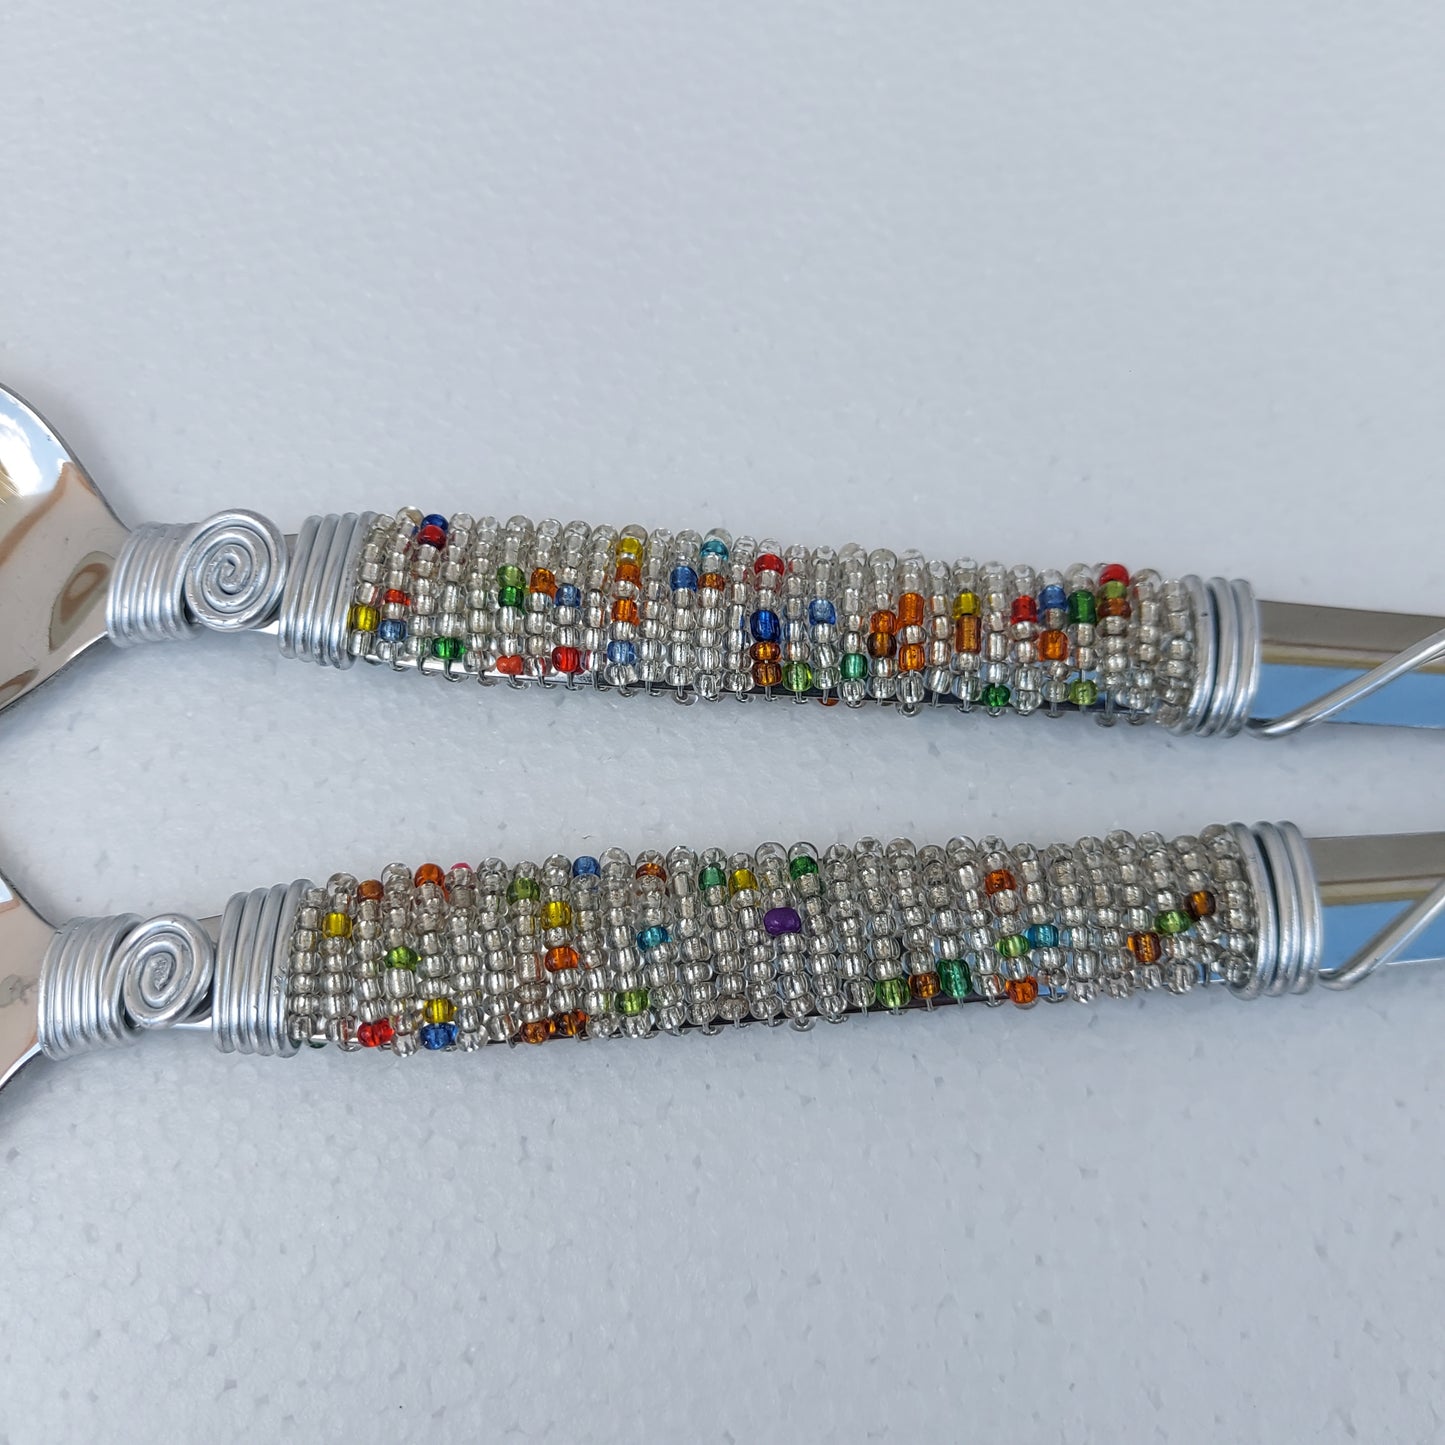 2 Beaded Salad Serving Spoons